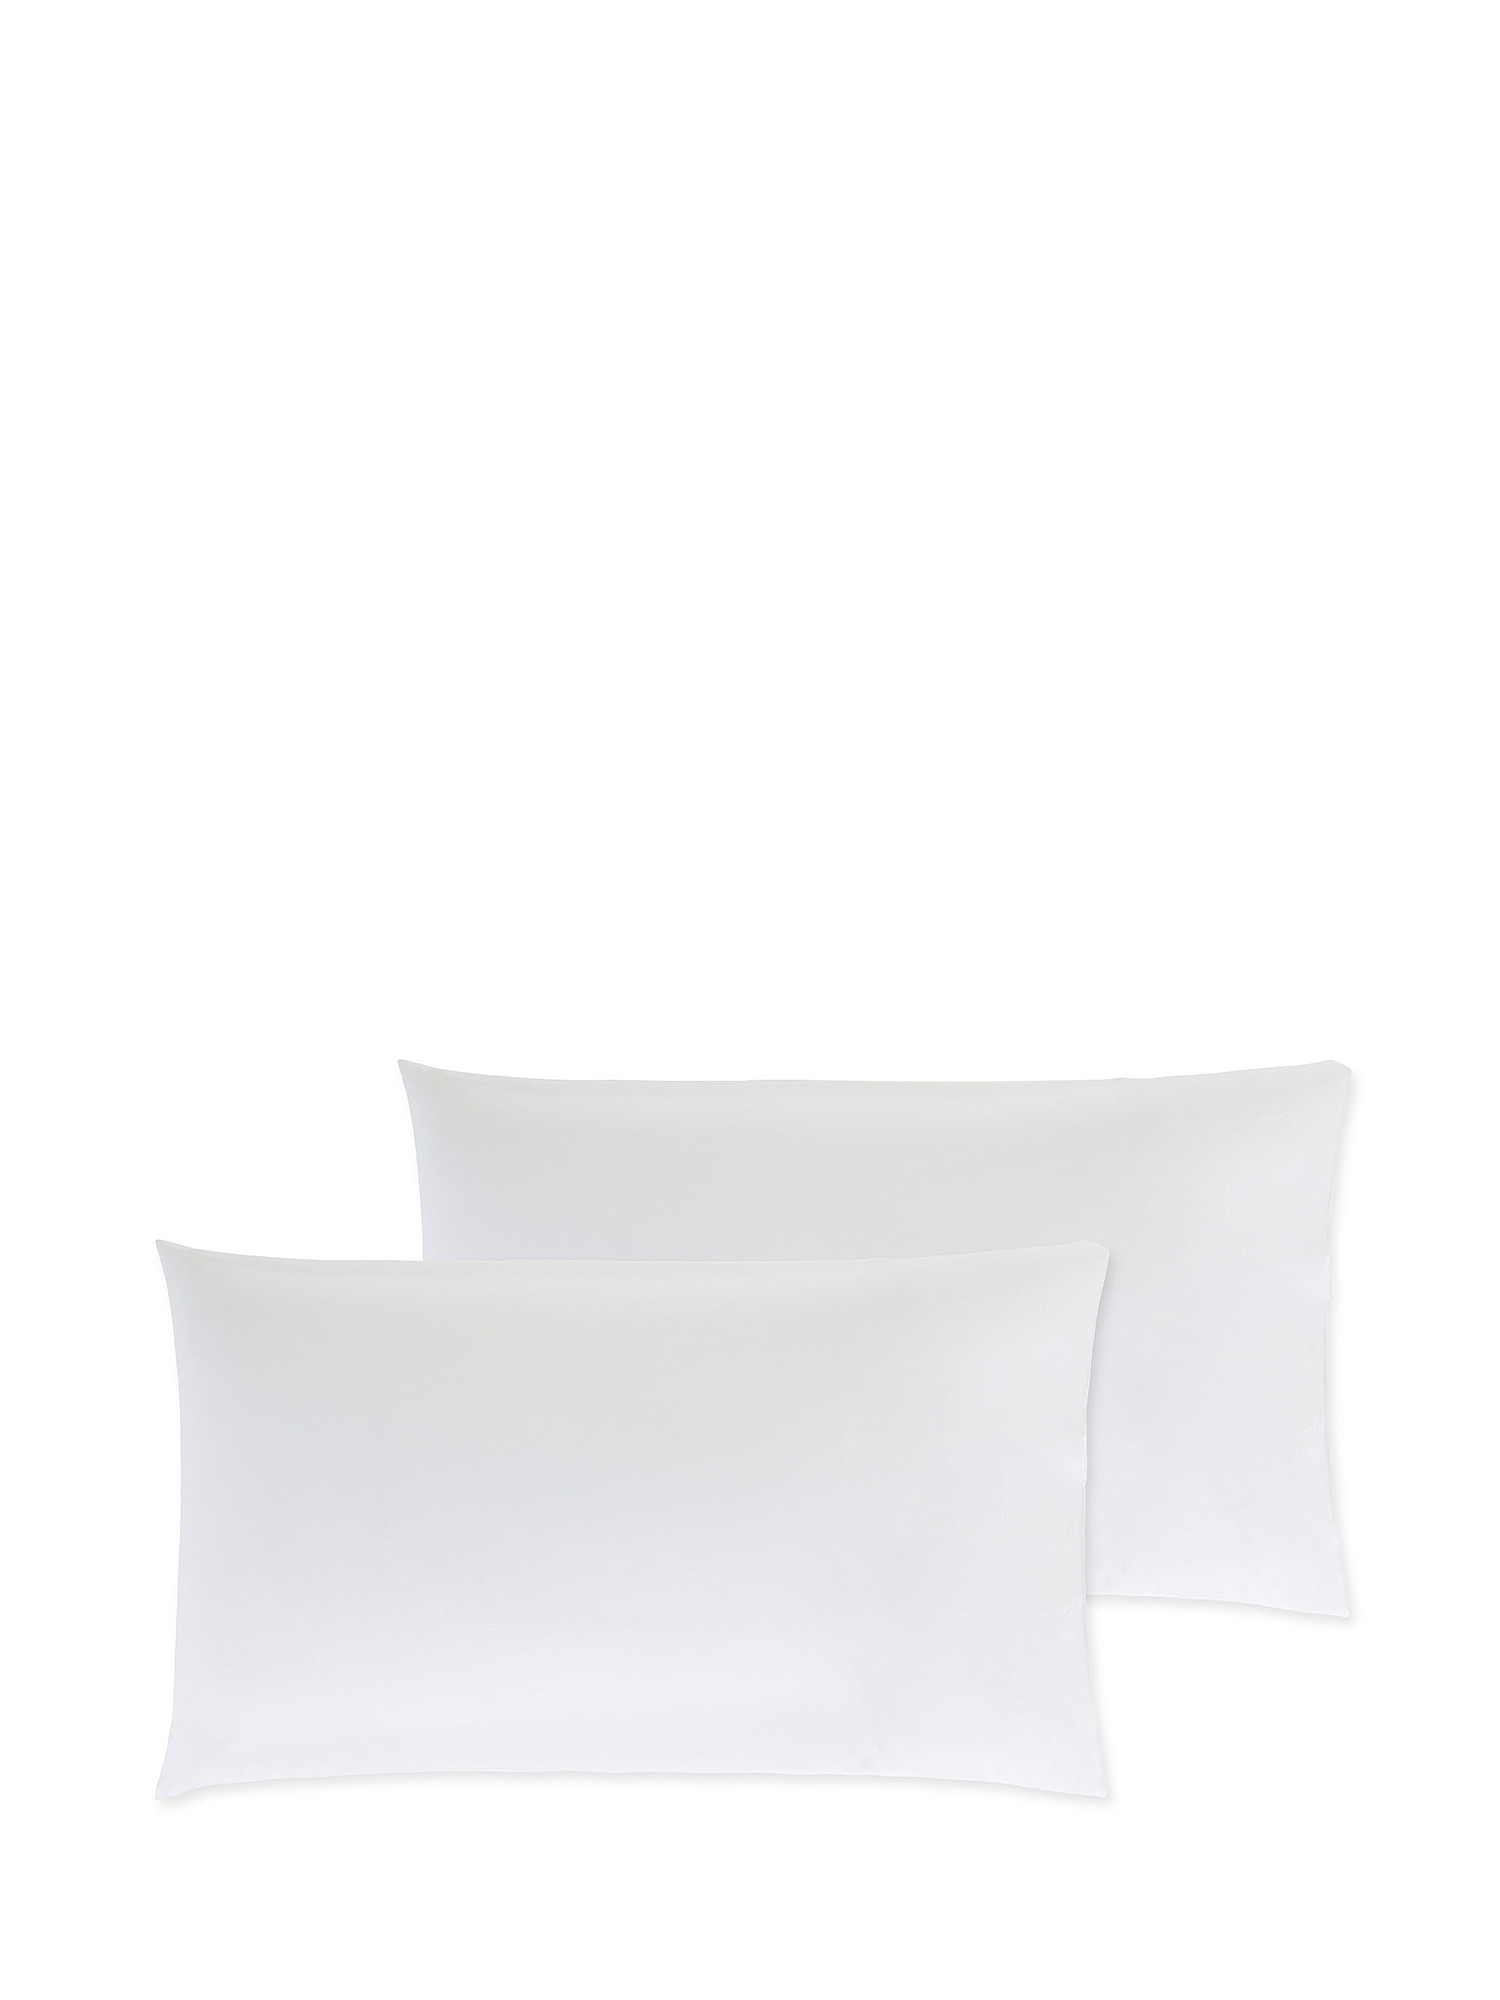 Set of 2 solid color percale cotton pillowcases, White, large image number 0